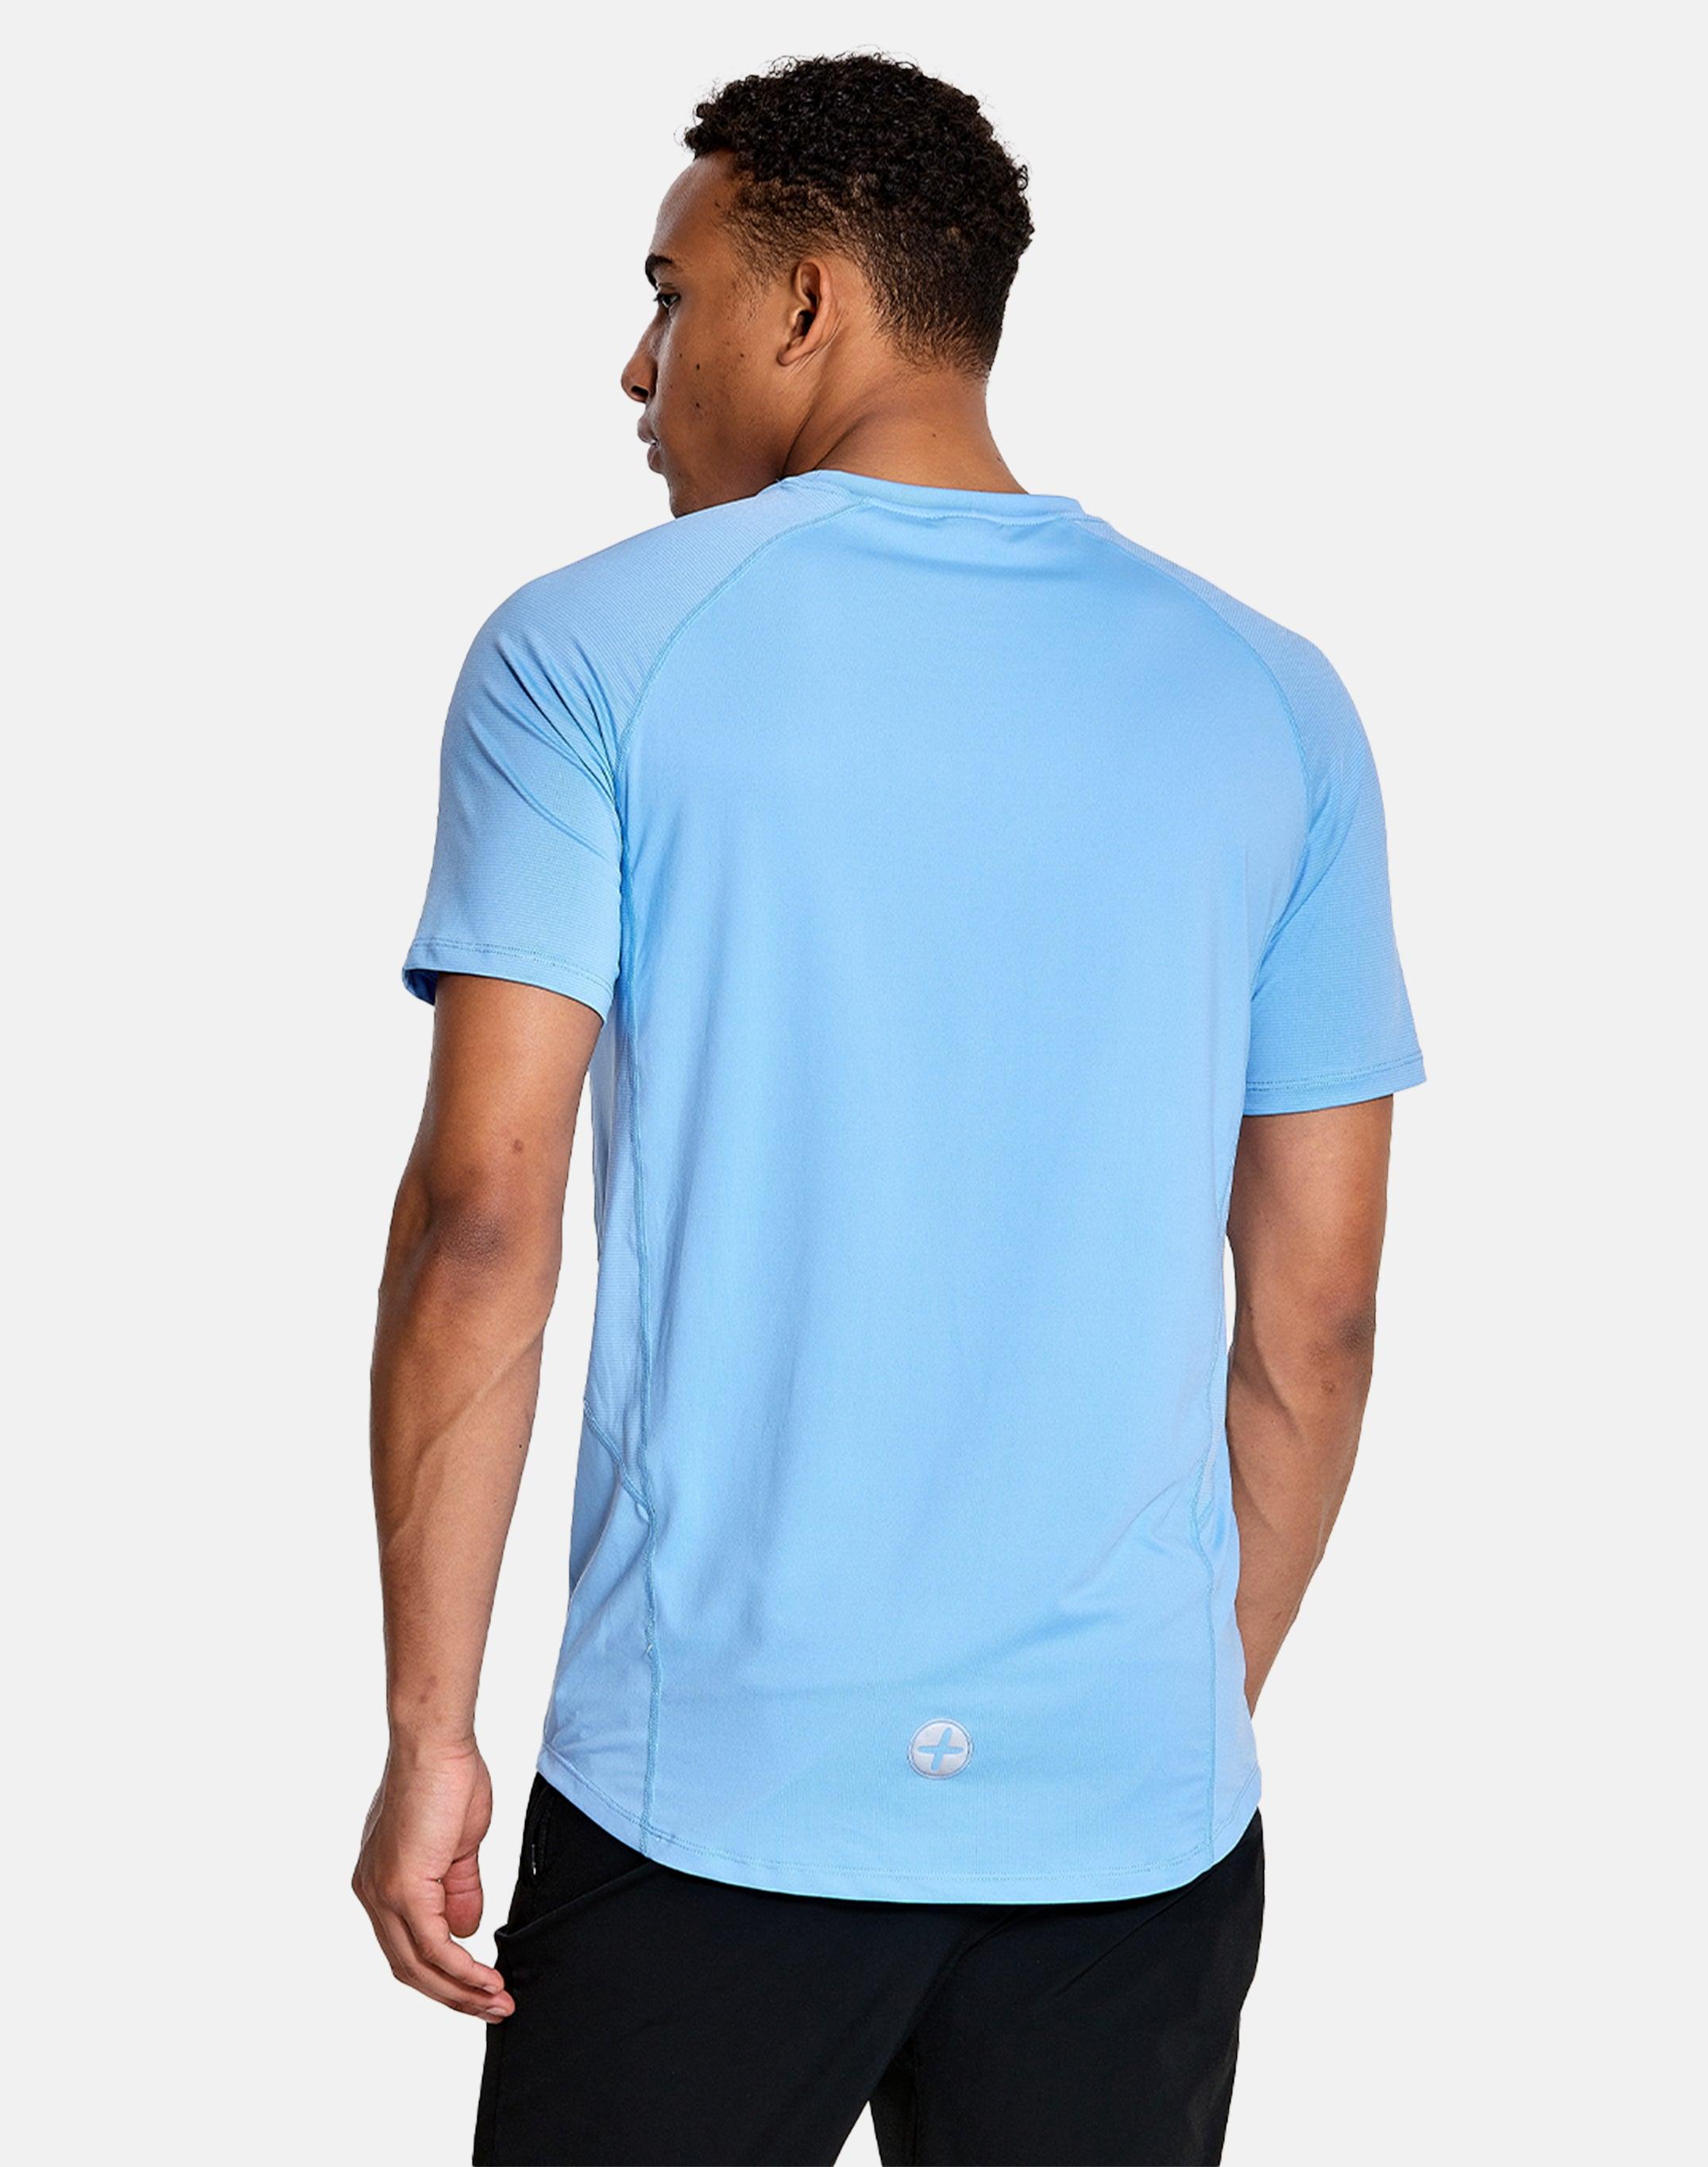 Surge Tee in Blue - T-Shirts - Gym+Coffee